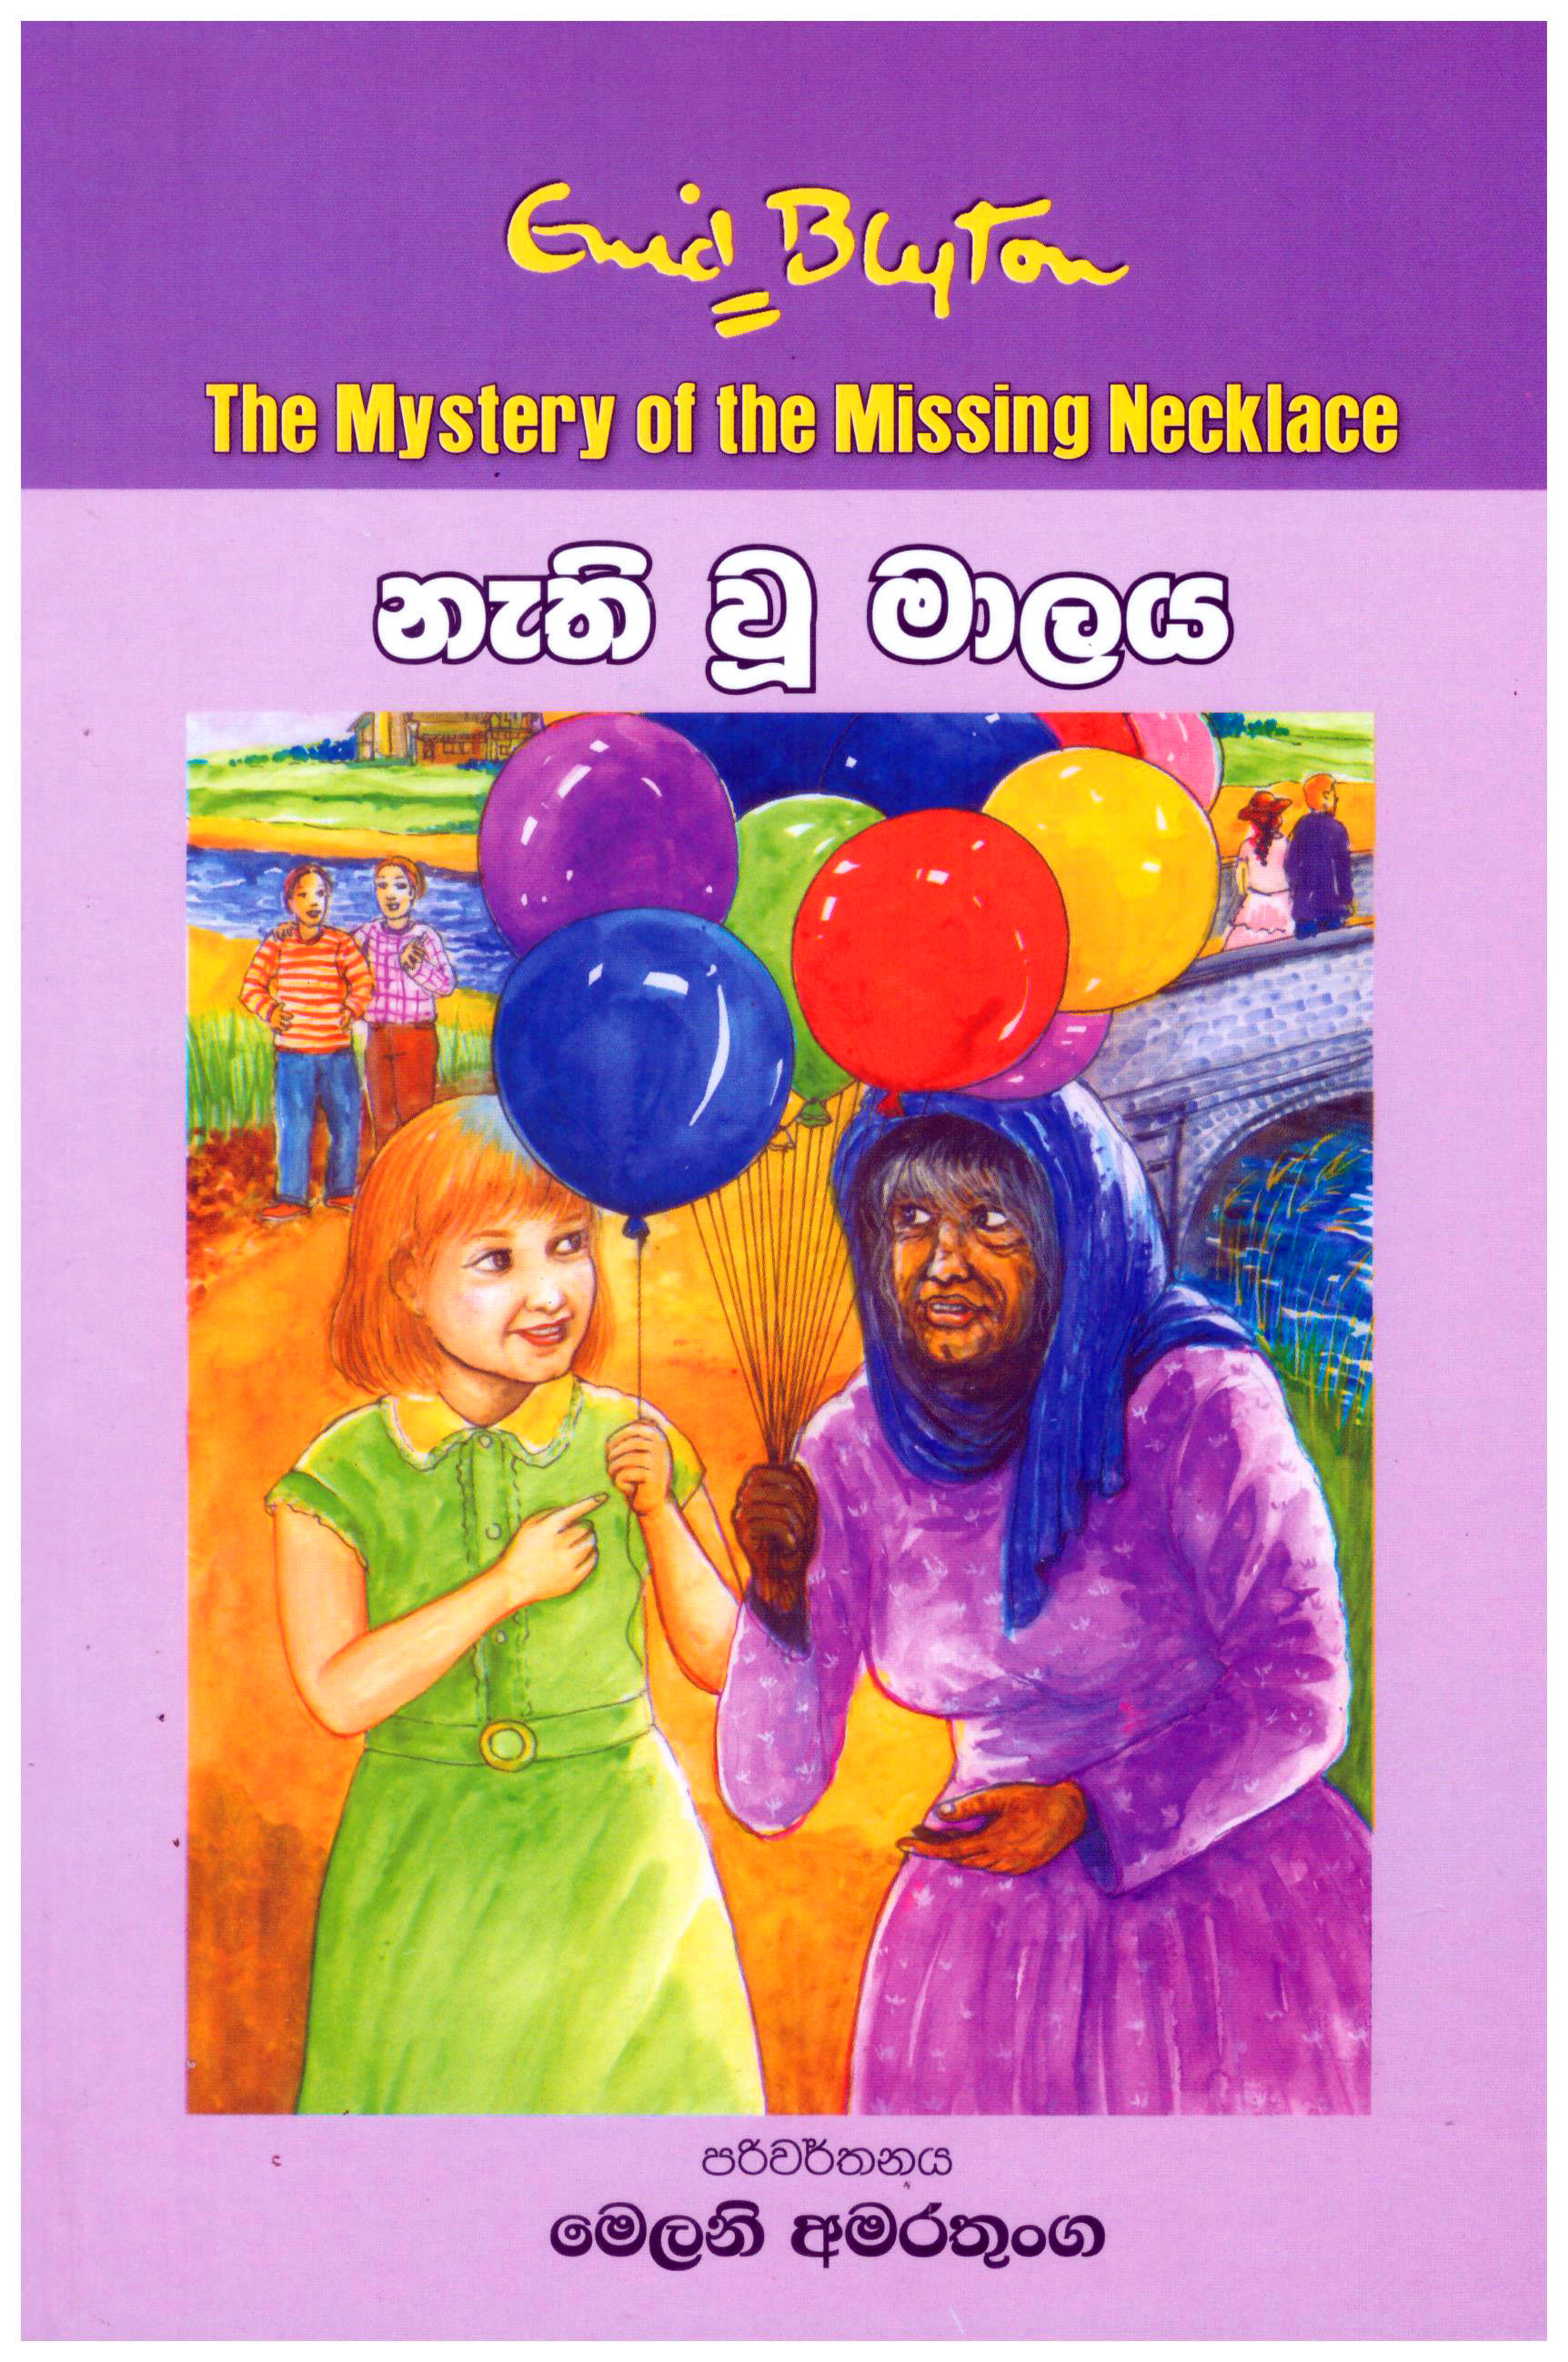 Nethi Wu Maalaya - Translations of The Mystery of The Missing Necklace by Enid Blyton